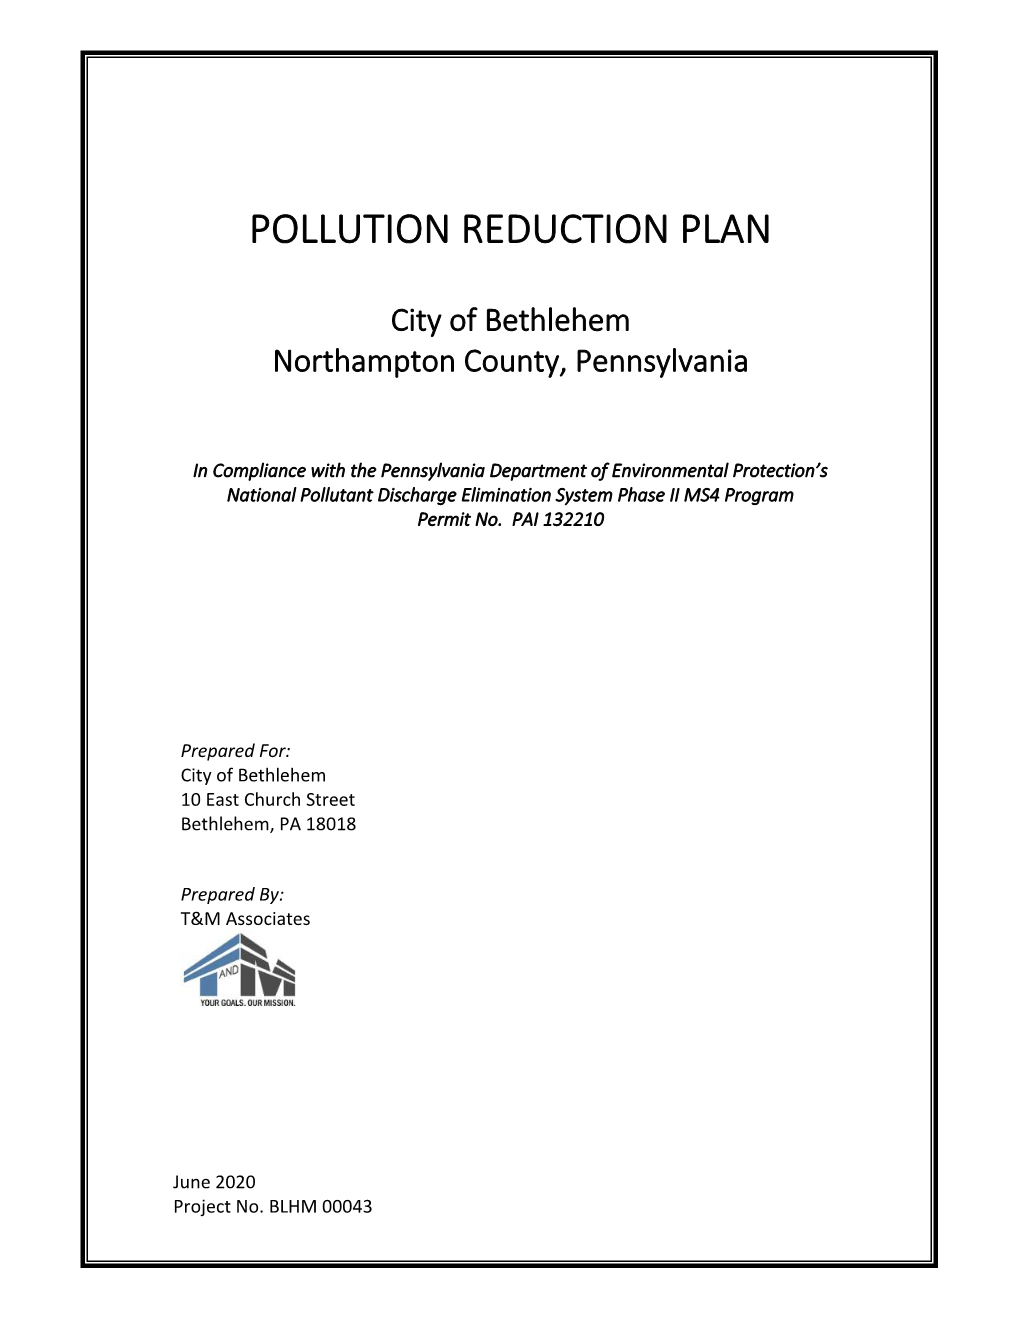 Pollution Reduction Plan